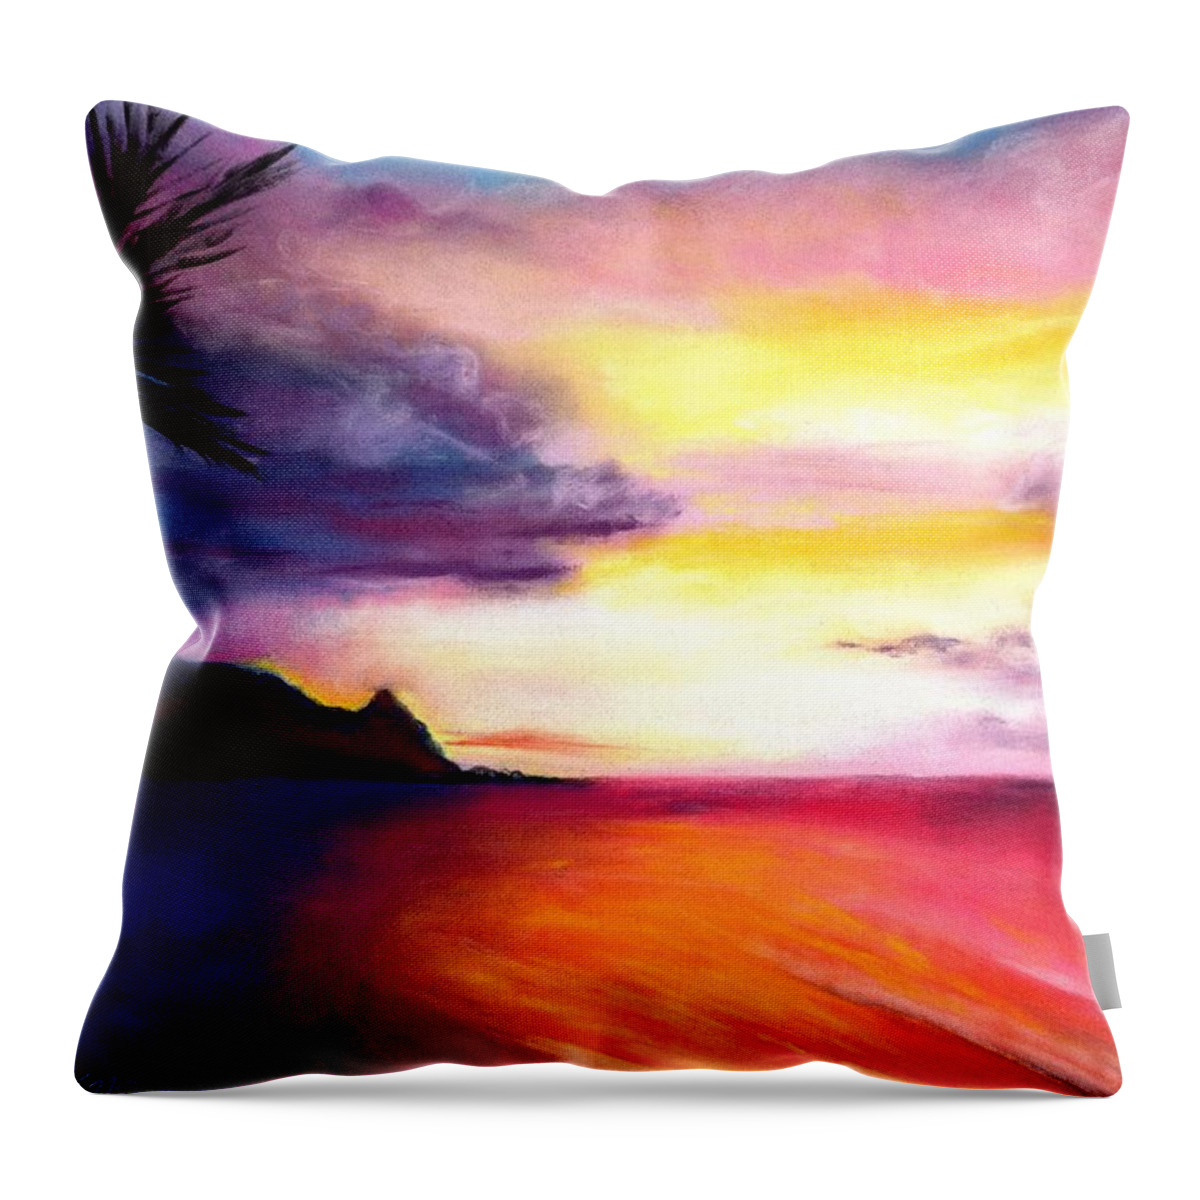 Hanalei Throw Pillow featuring the painting Hanalei Sunset by Marionette Taboniar